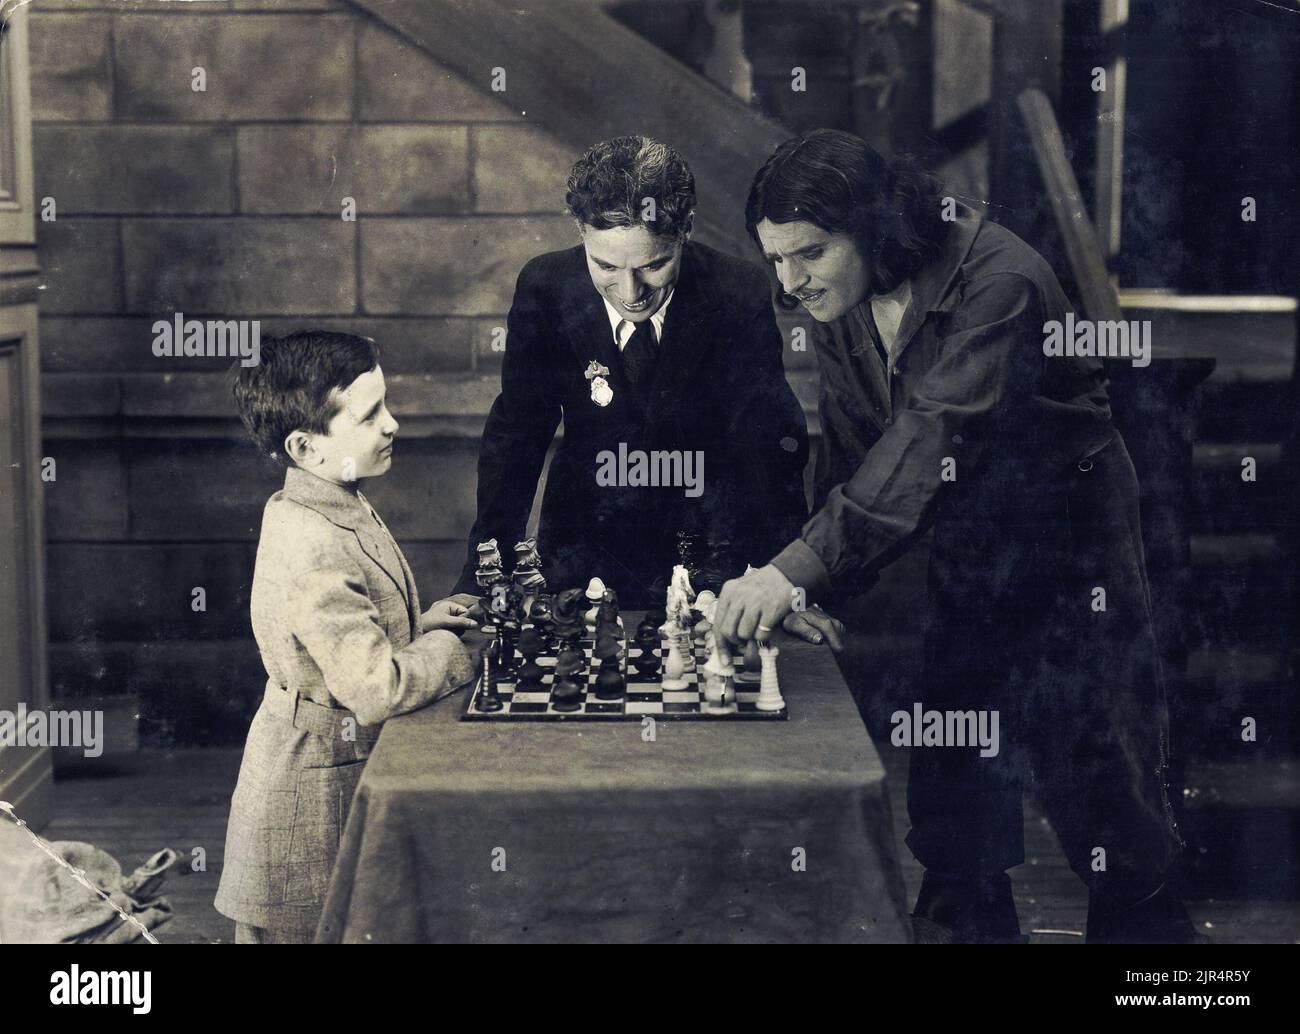 PDF) A Game of Chess MHC  Marion Clark 